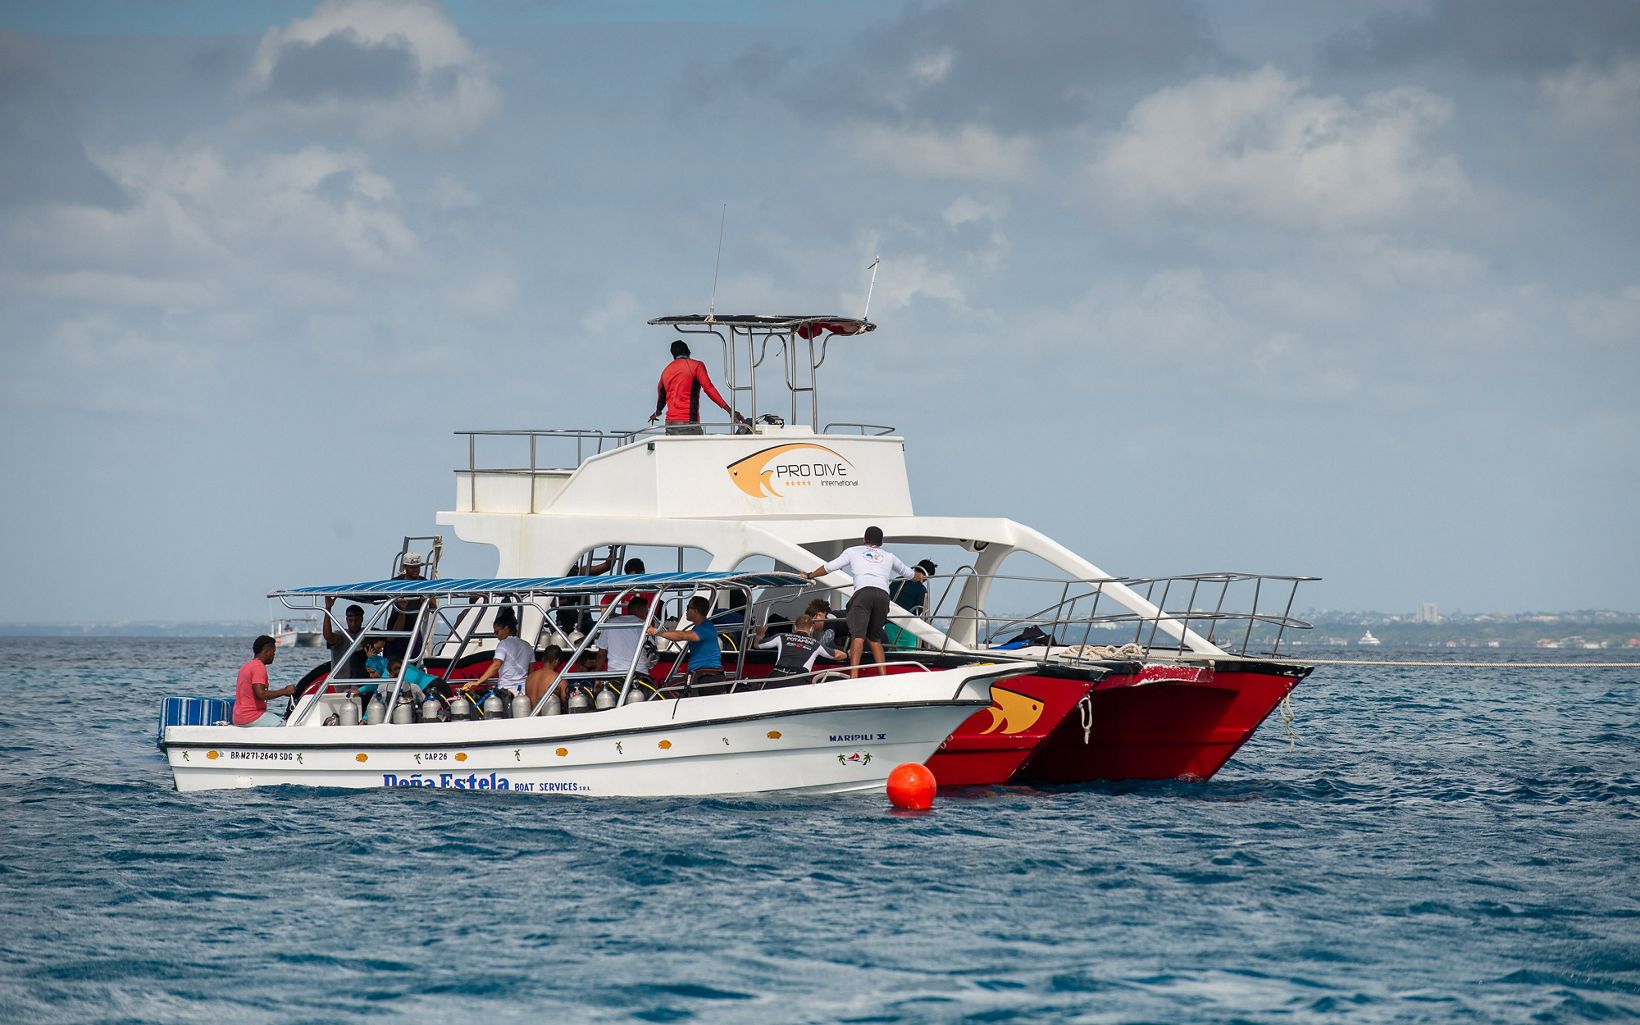 A diving boat off the coast of the Dominican Republic.